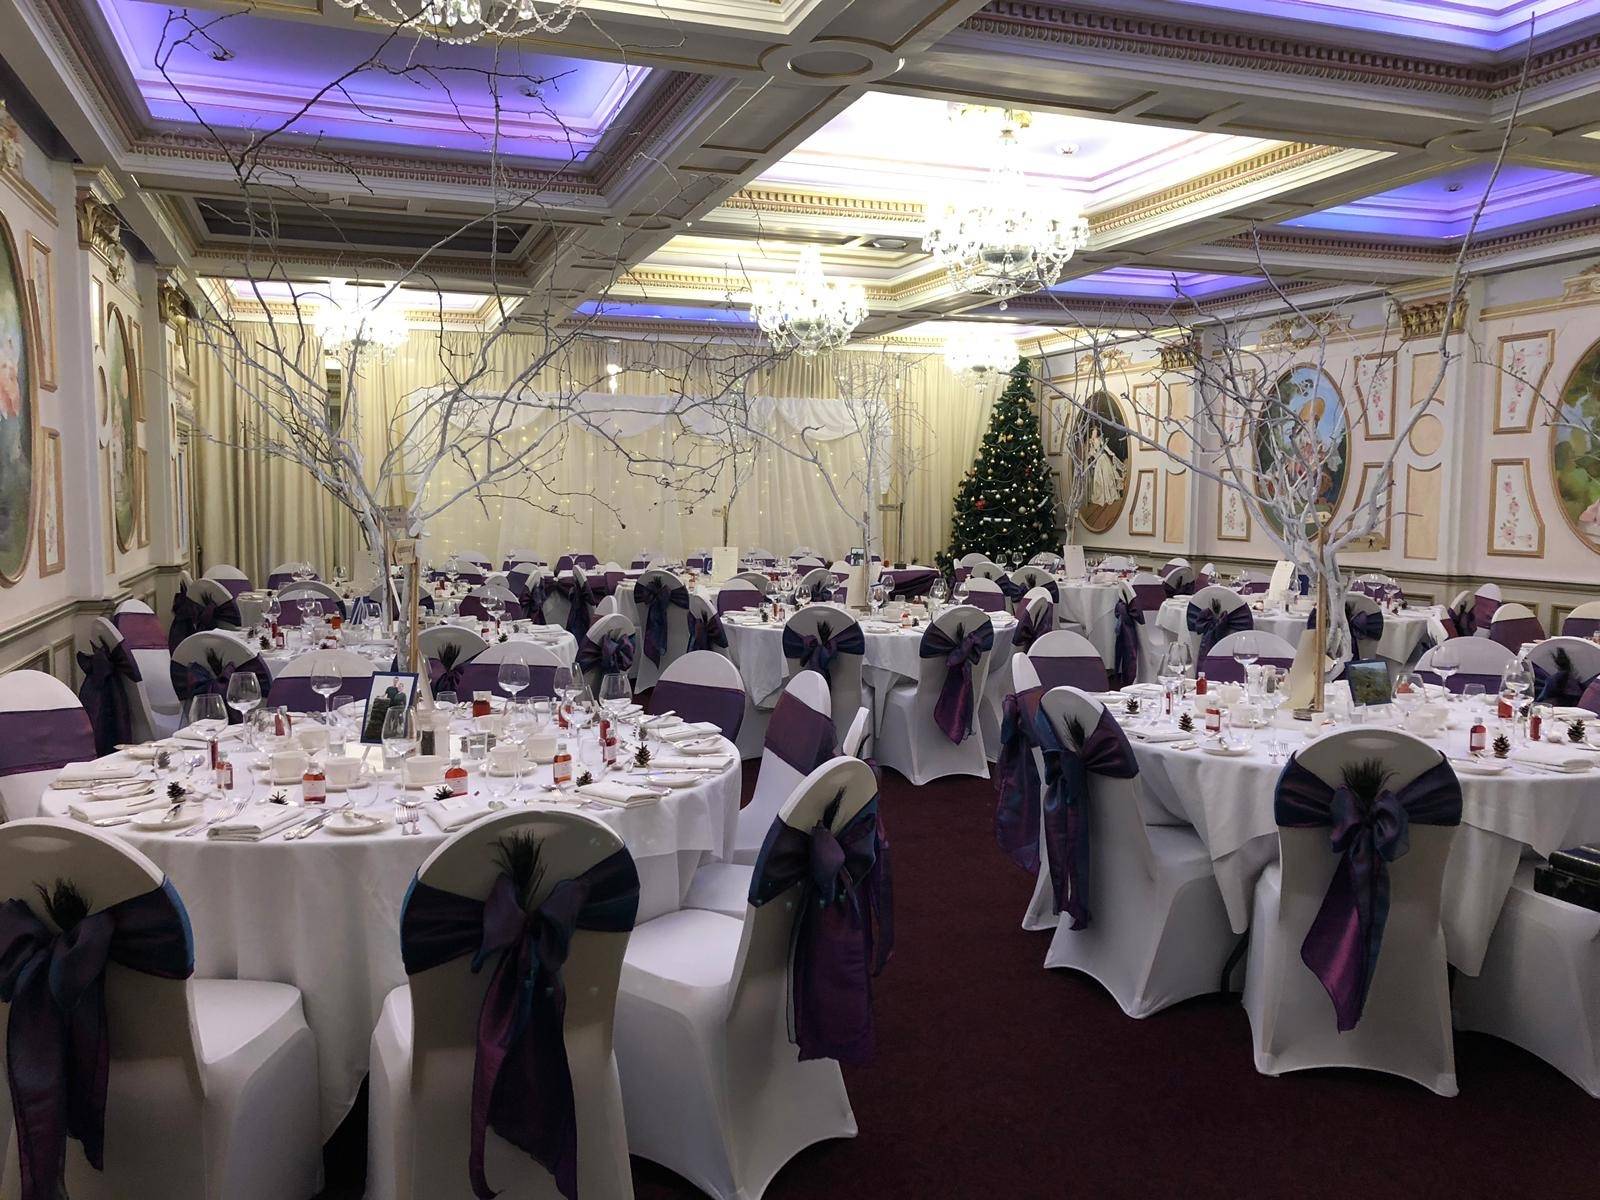 a room filled with tables covered in white and purple cloths.